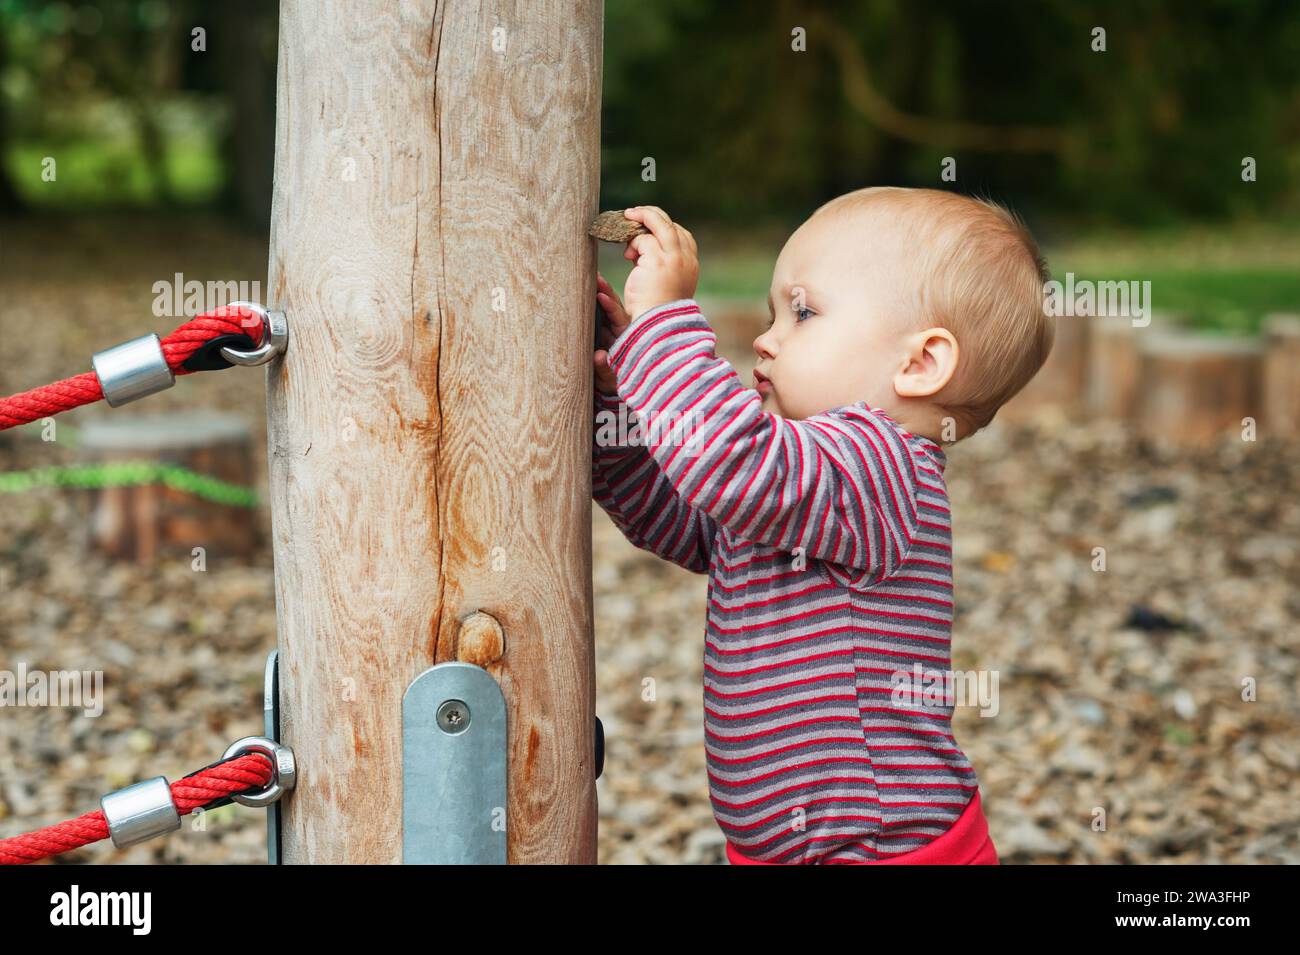 Outdoor portrait of adorable baby girl having fun on playground, cute little 9-12 months child playing outdoors Stock Photo